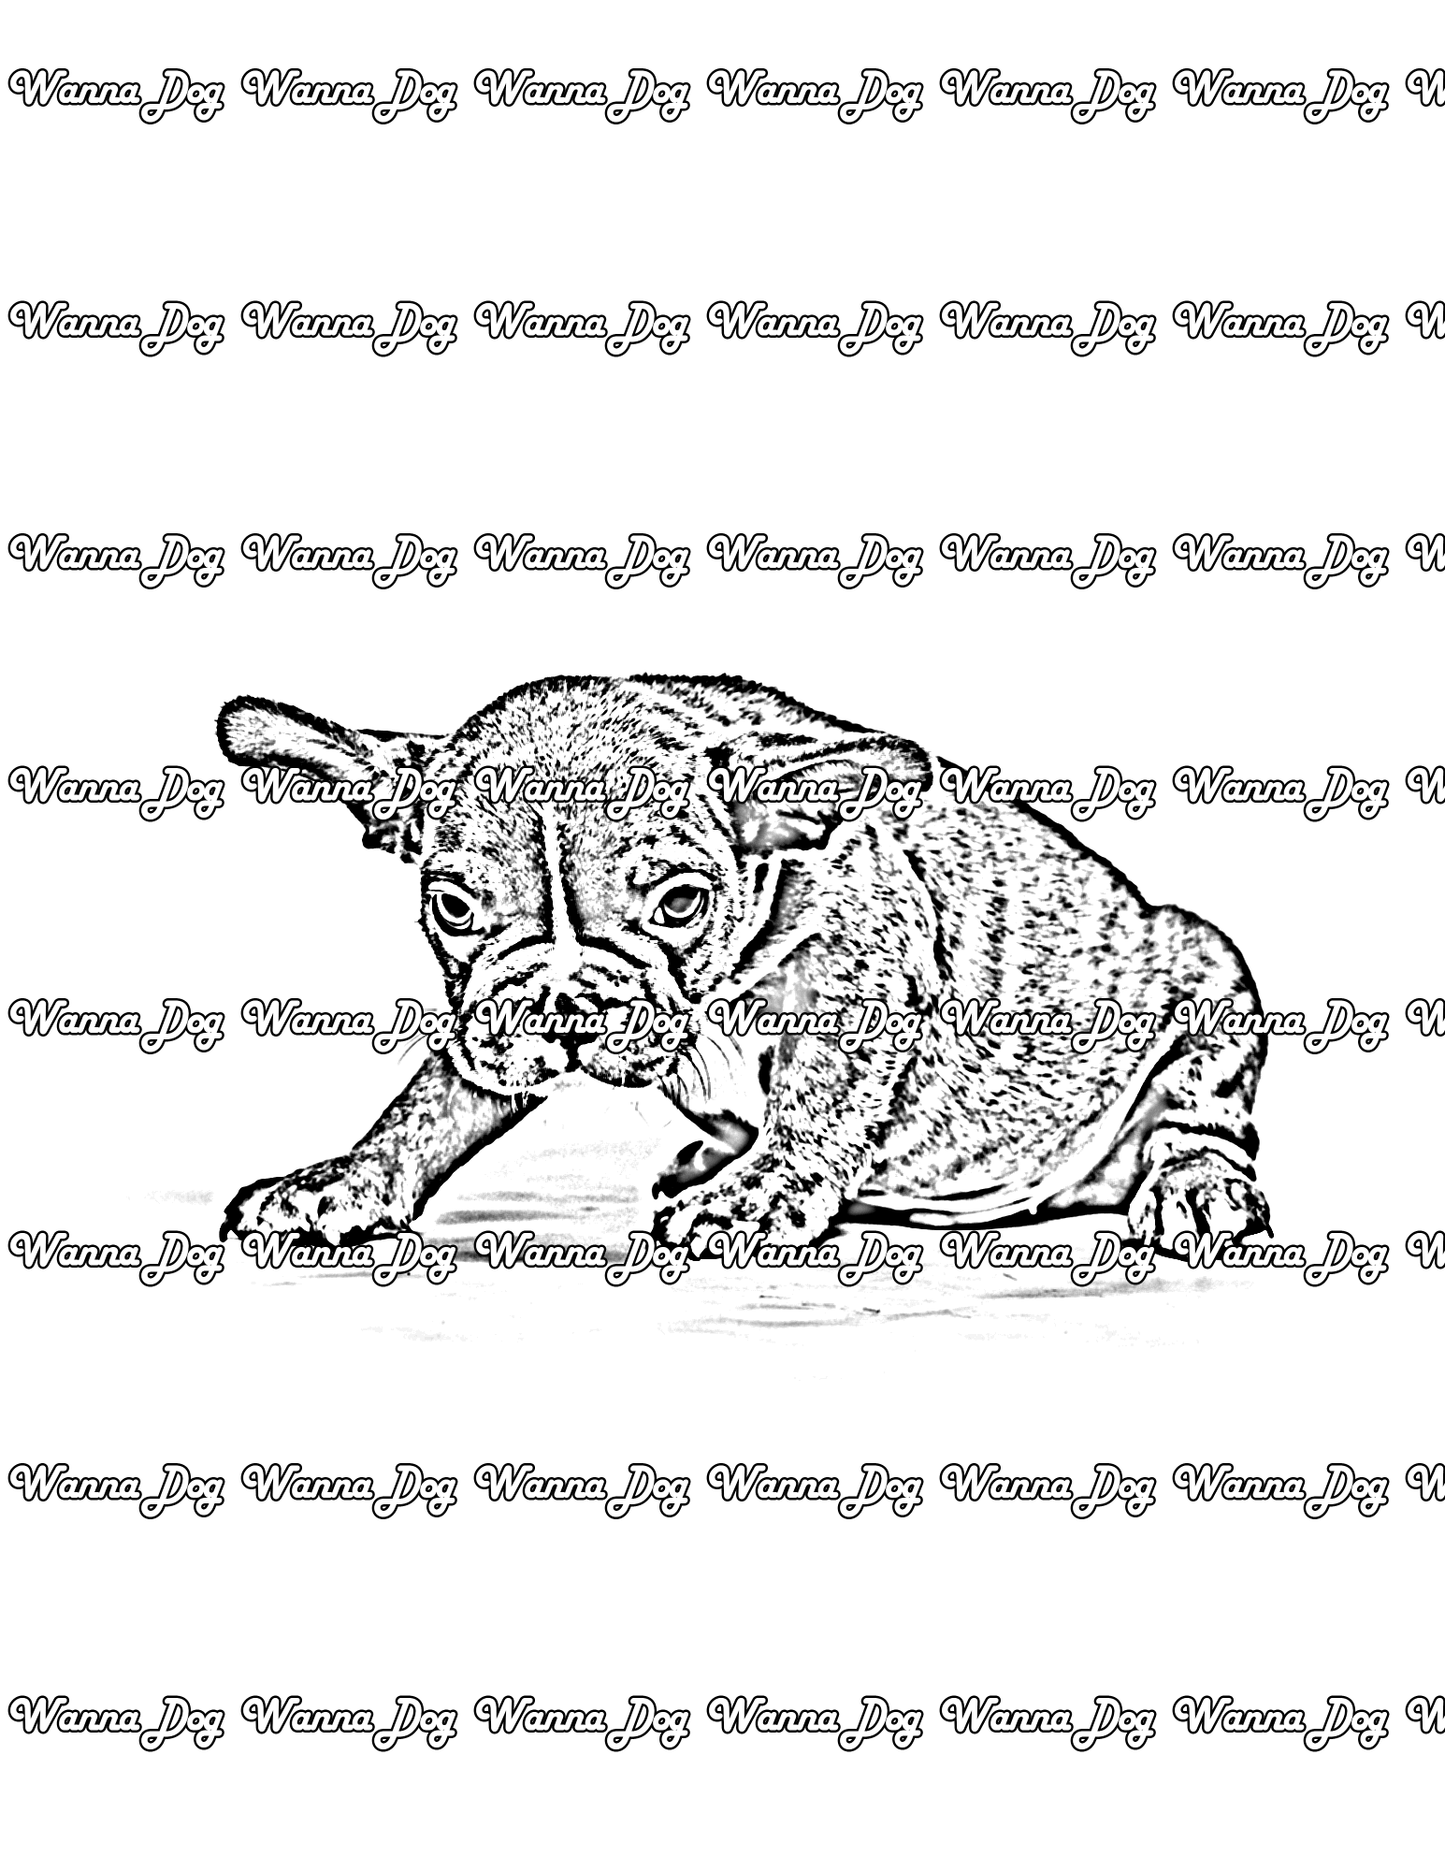 French Bulldog Puppy Coloring Page of a French Bulldog Puppy sitting